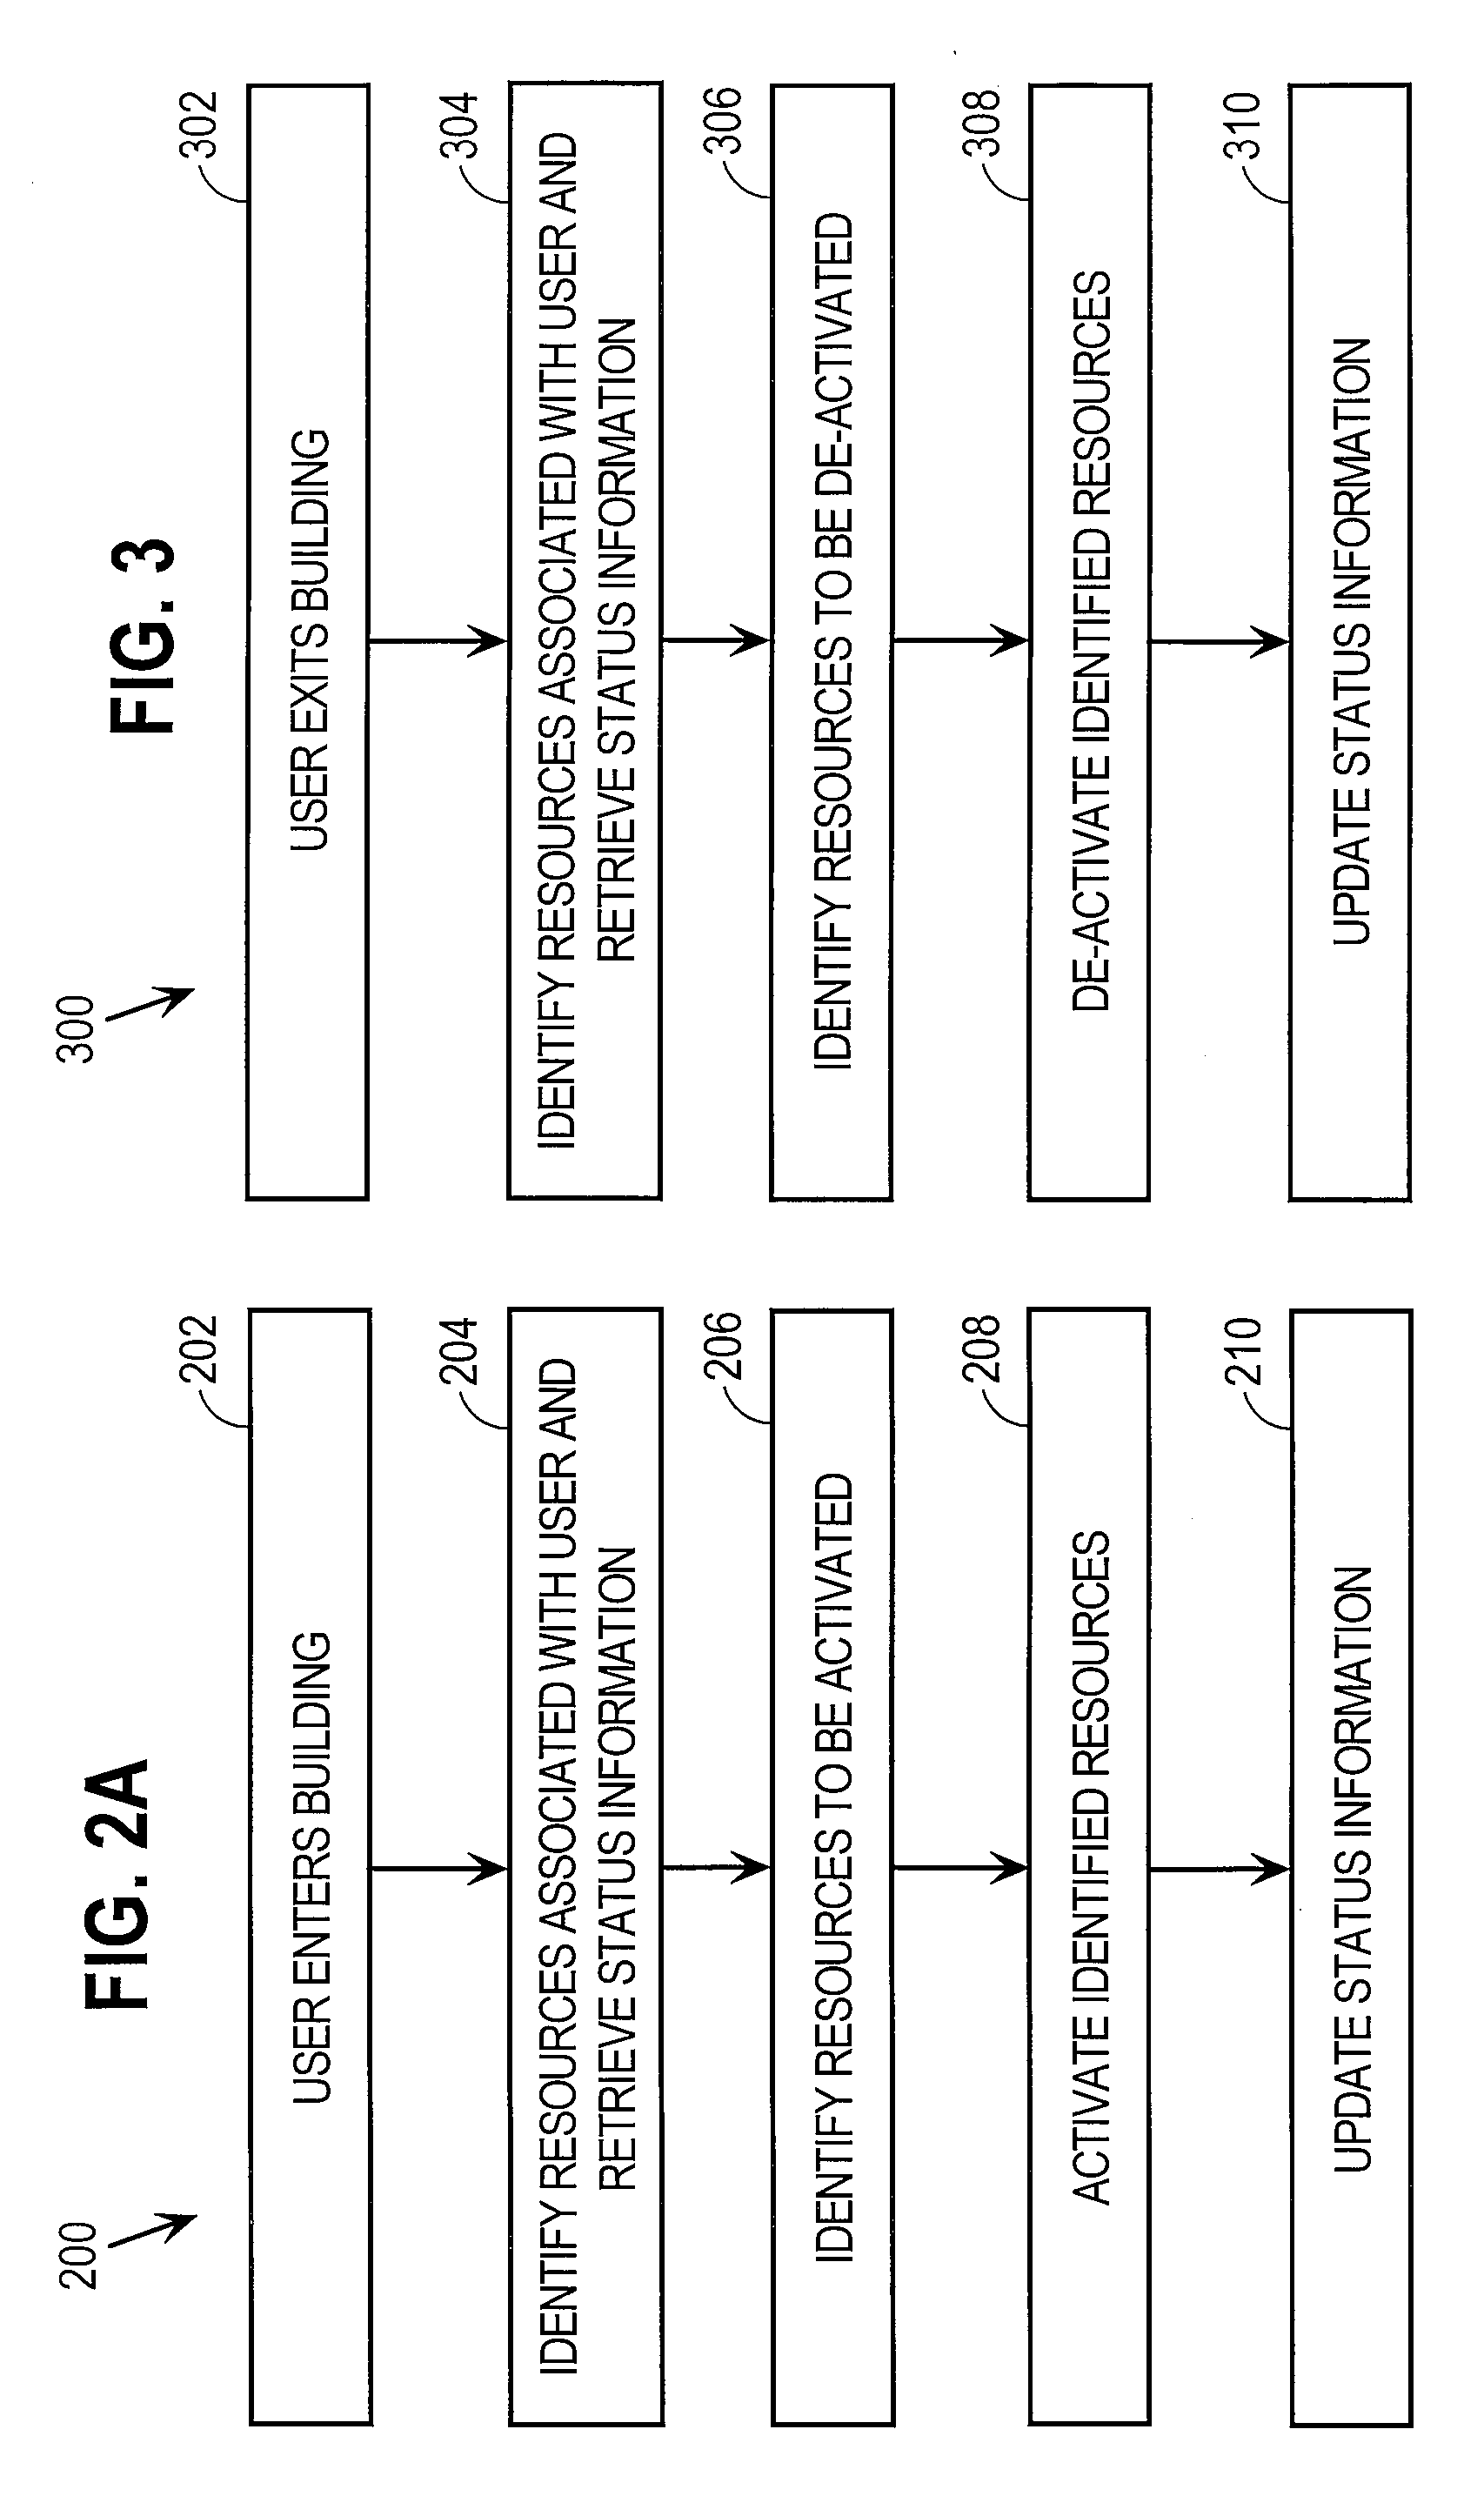 Approach For Determining Alternative Printing Device Arrangements